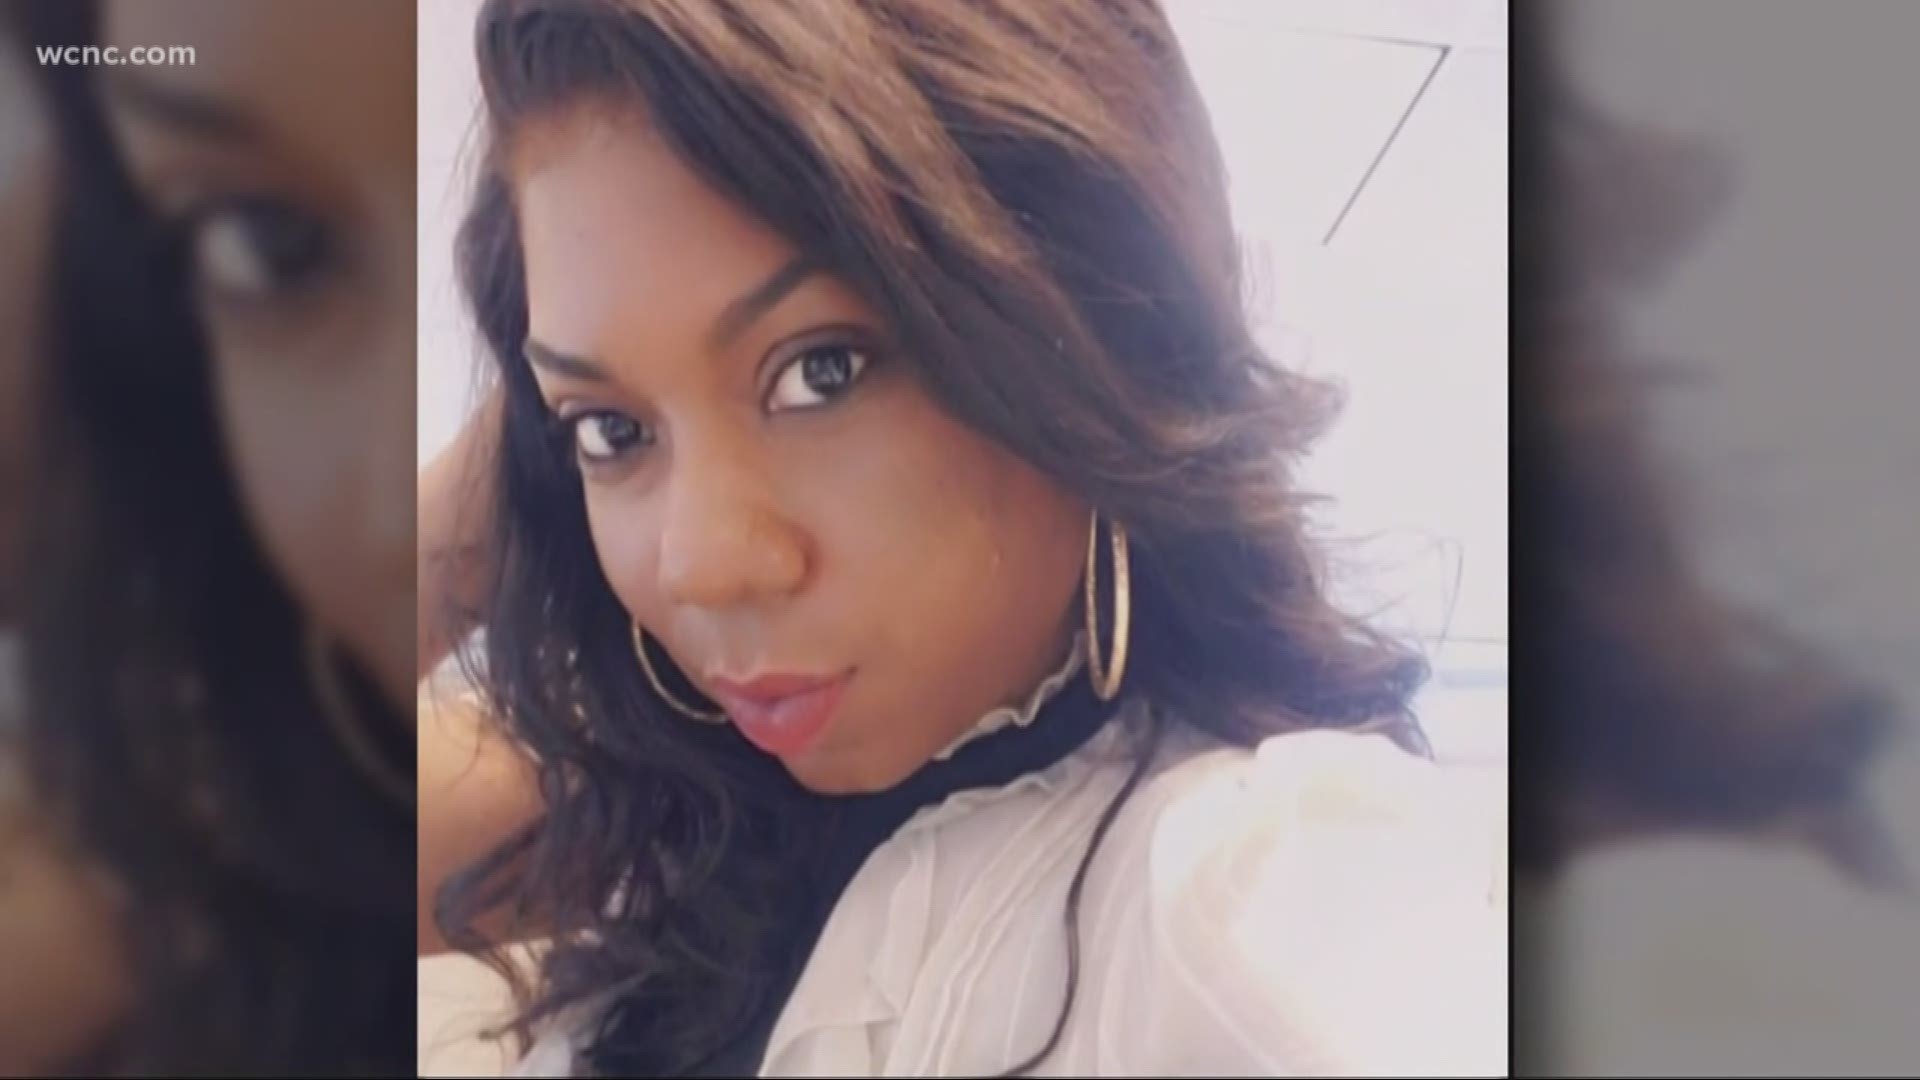 Police say 35-year old Aliyah Terry, a mother of two, was stabbed to death in northeast Charlotte. Police say just hours before the stabbing, officers received a call at that same home for a domestic dispute.